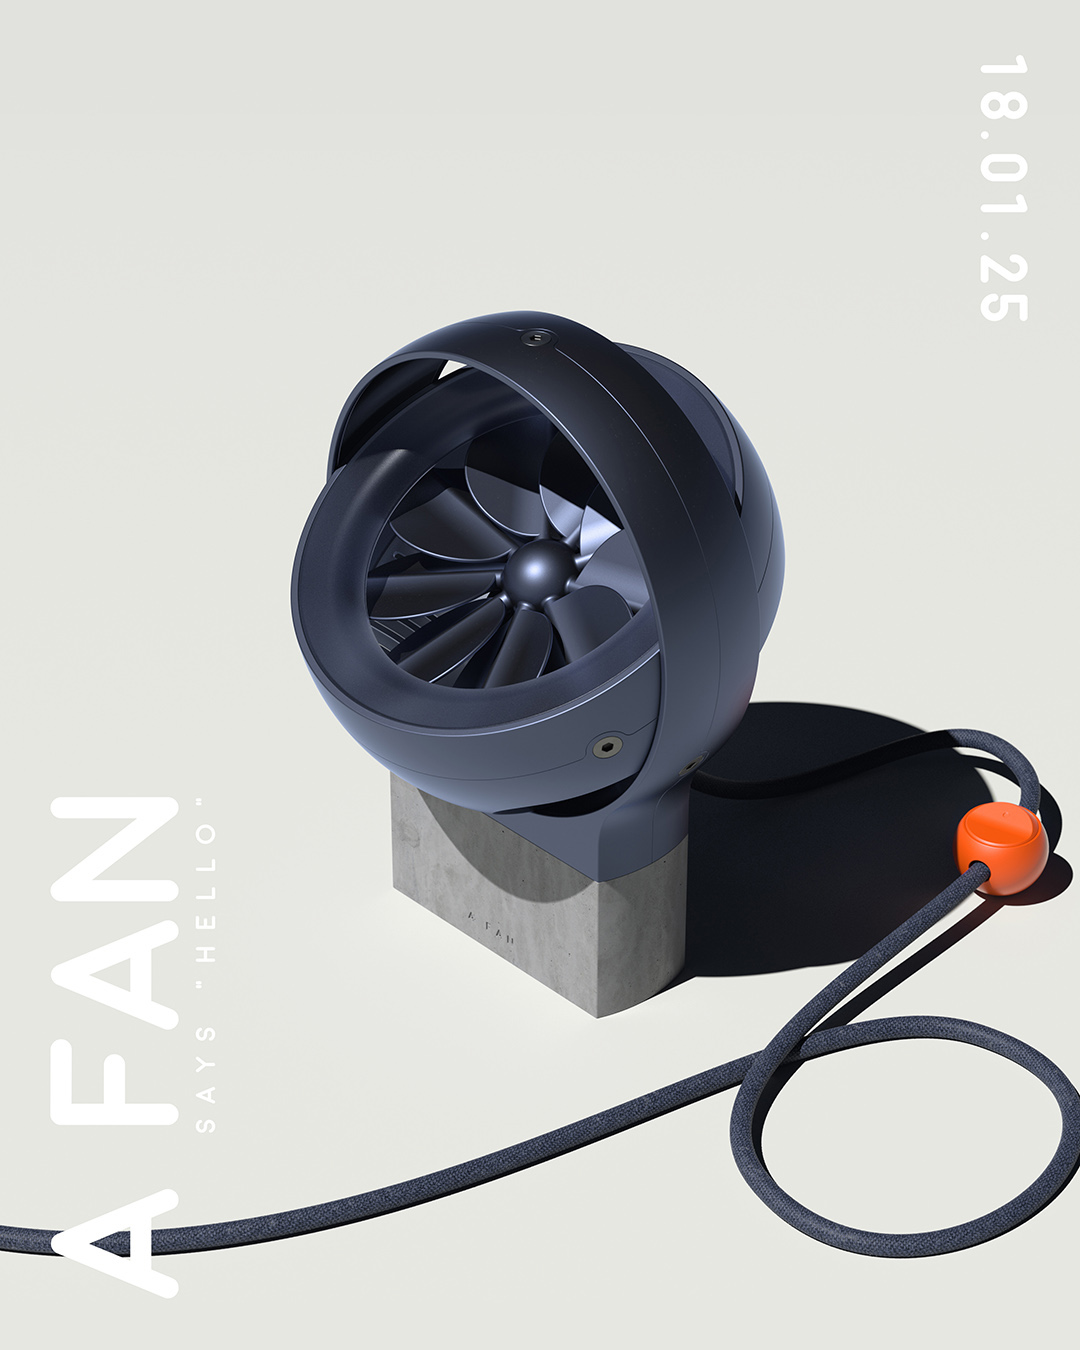 fan desk fan air cool chill product industrial design  design product design  blowingwithcs